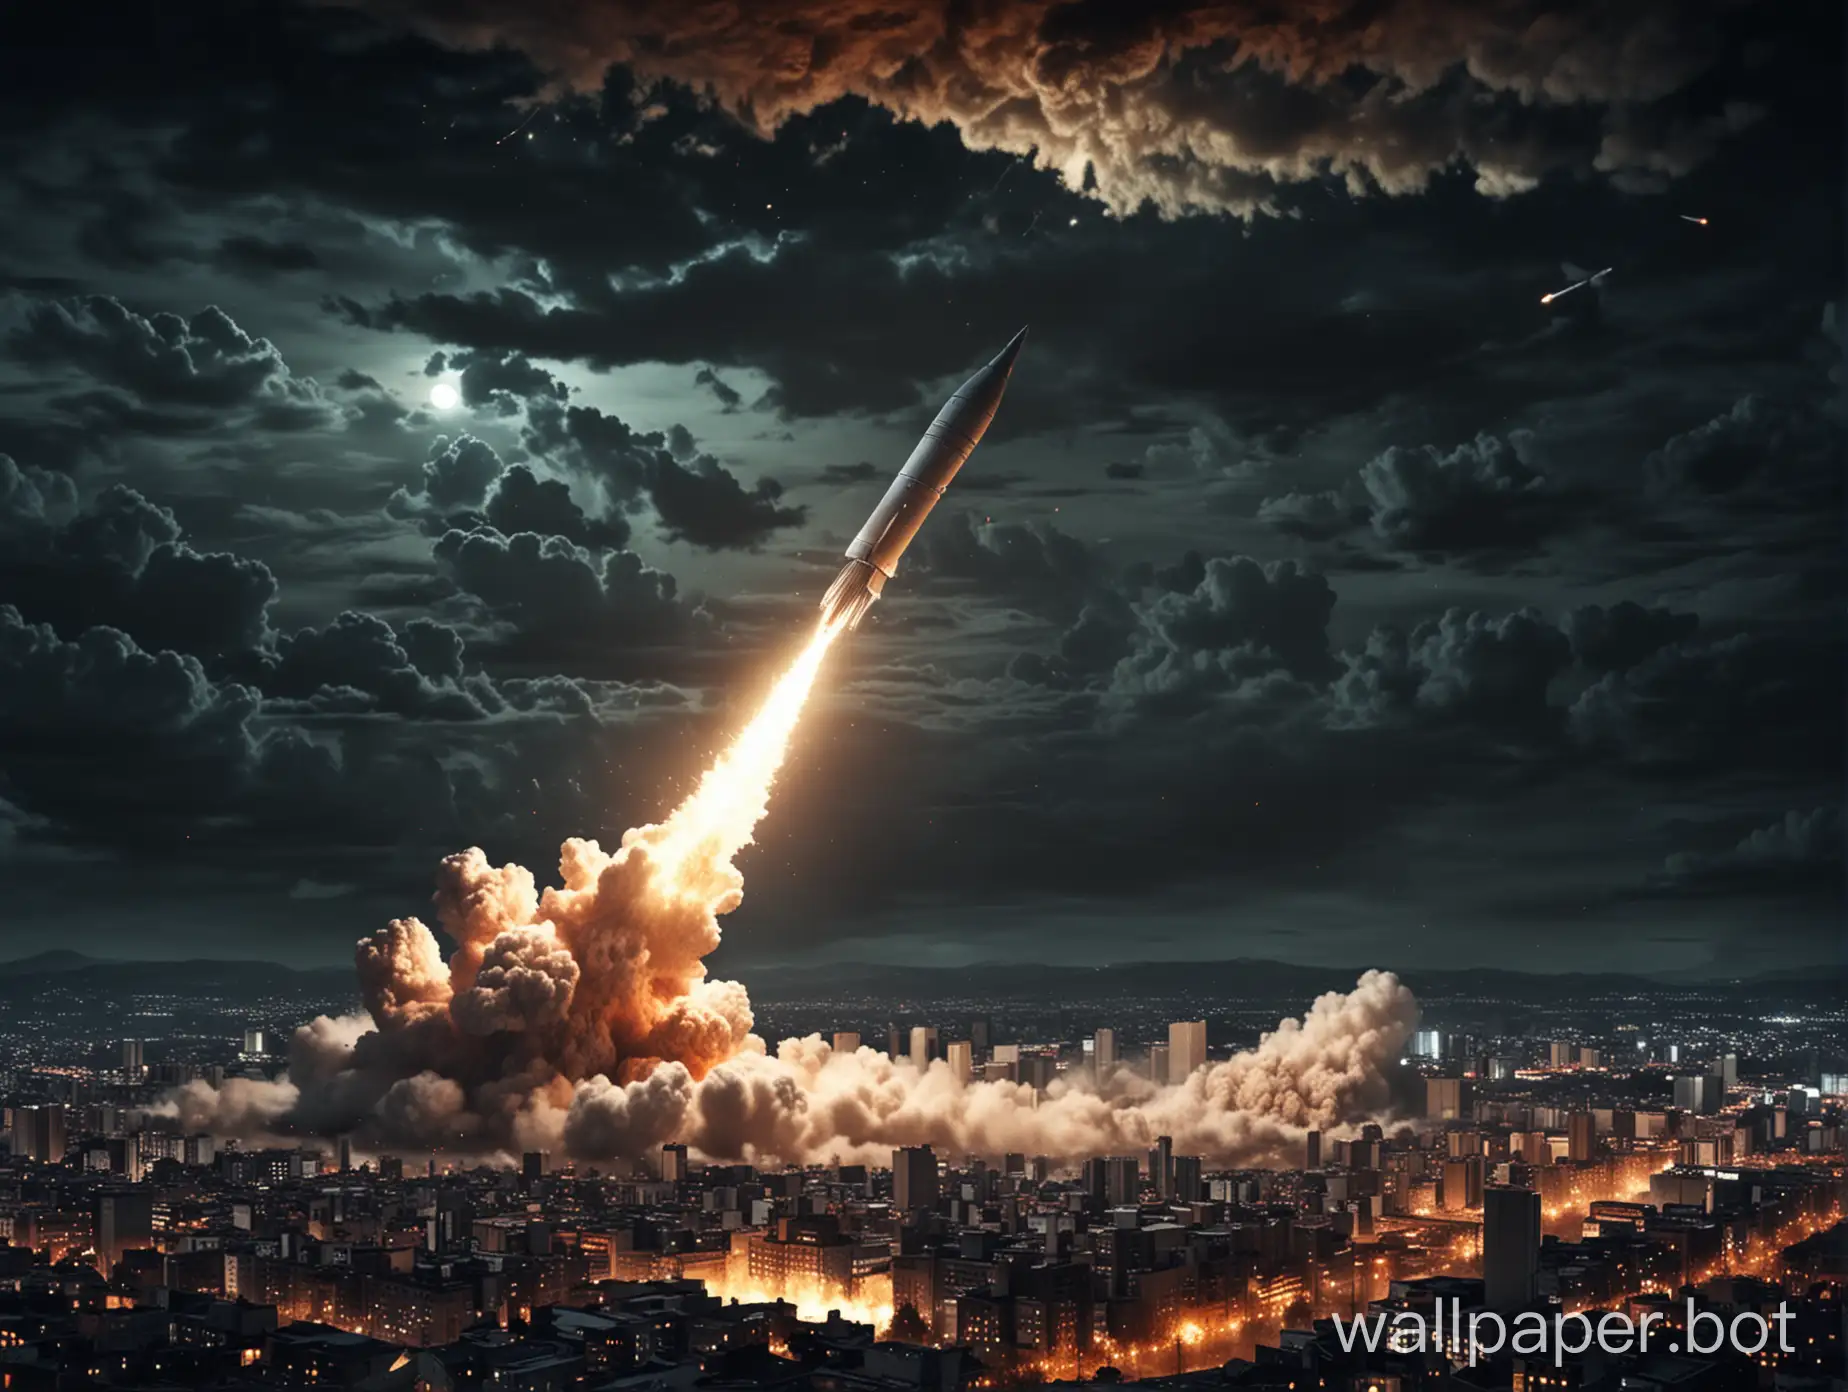 Nuclear-Missile-Flying-Over-Night-City-with-Explosions